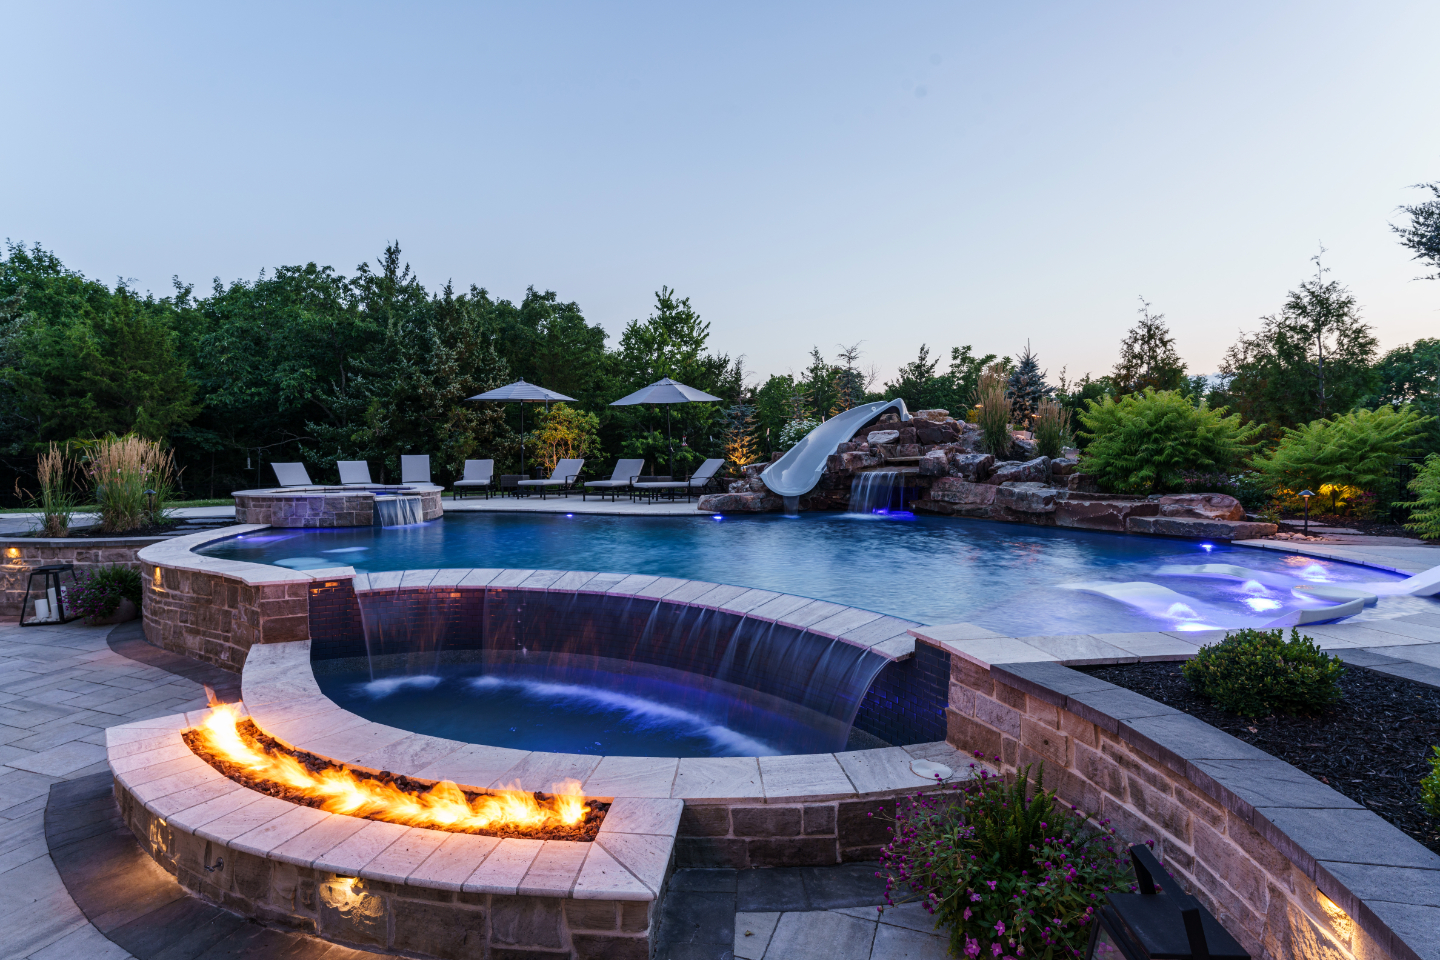 Outdoor pool with slide, waterfall and firepit